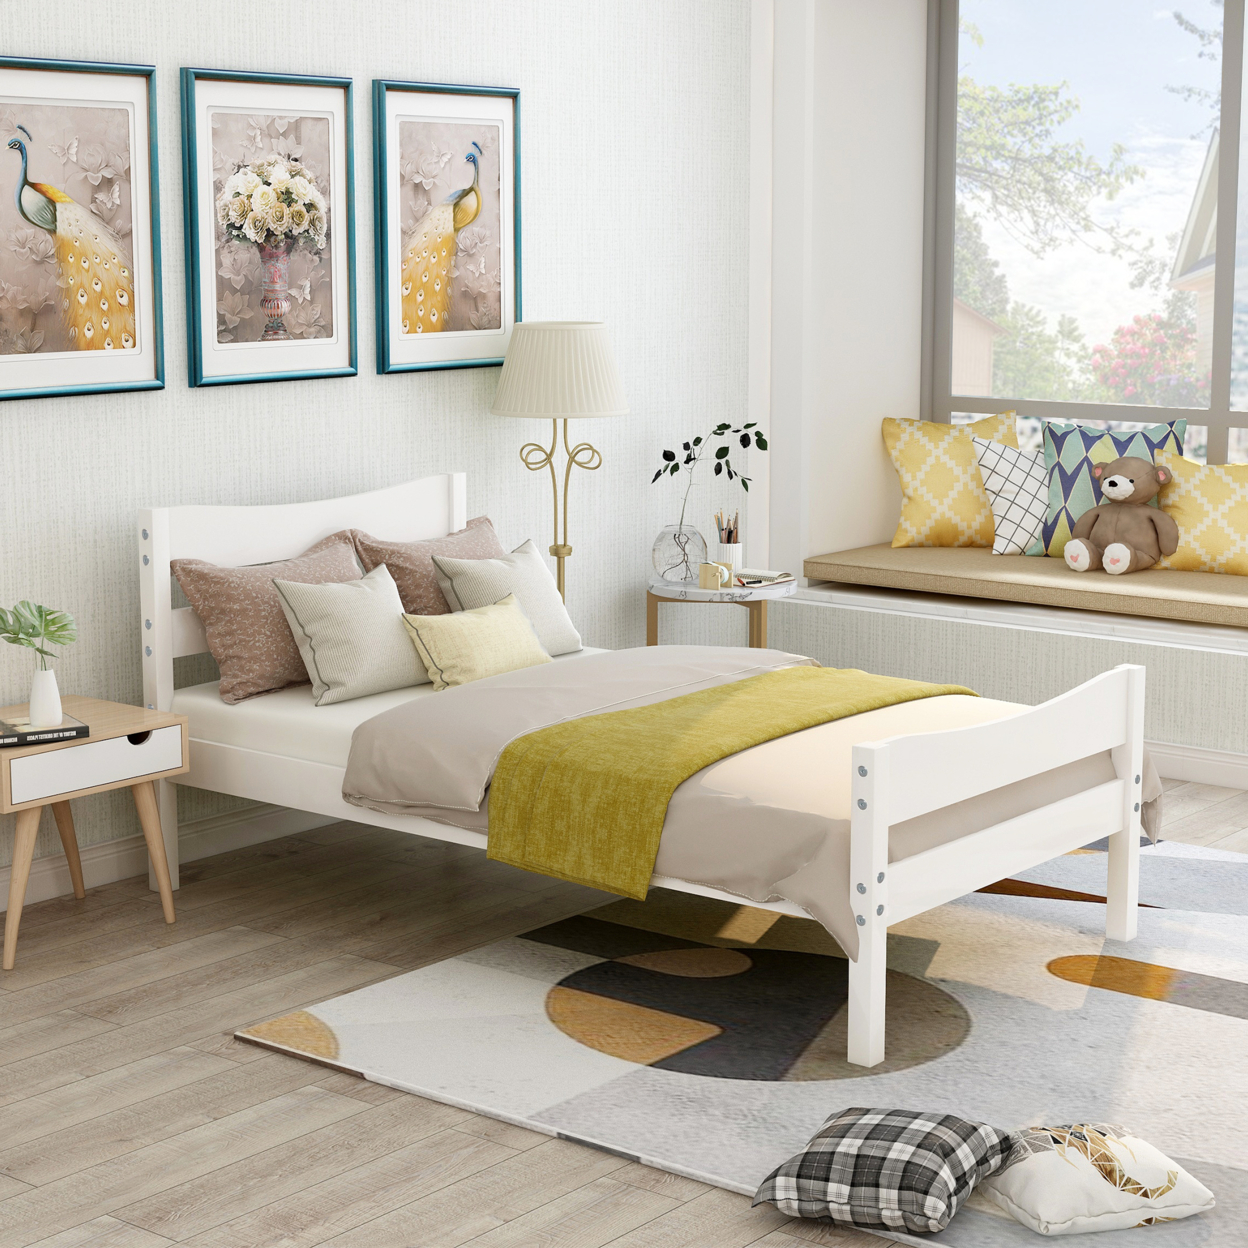 ï¿½ï¿½Not allowed to sell to Walmartï¿½ï¿½Twin Size Wood Platform Bed with Headboard and Wooden Slat Support (White)